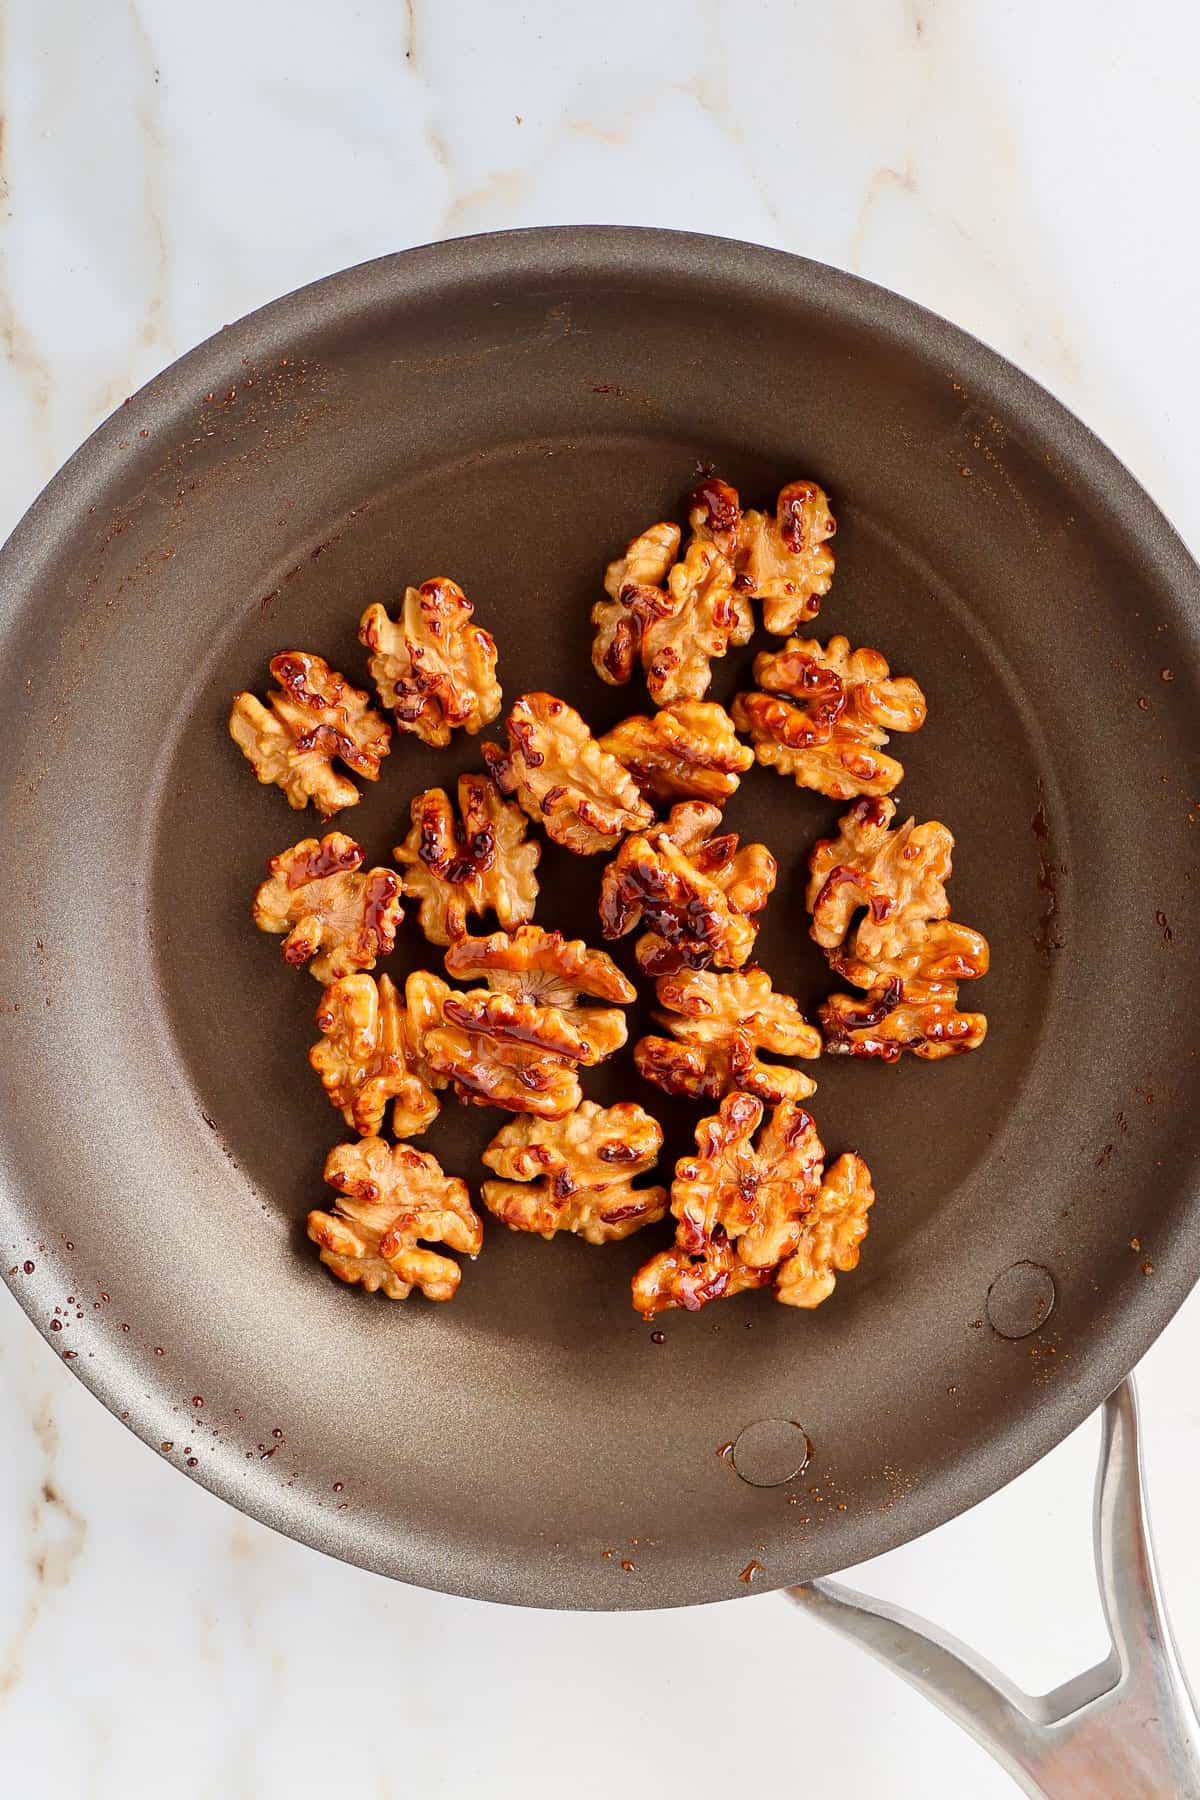 Candied walnuts in a skillet.